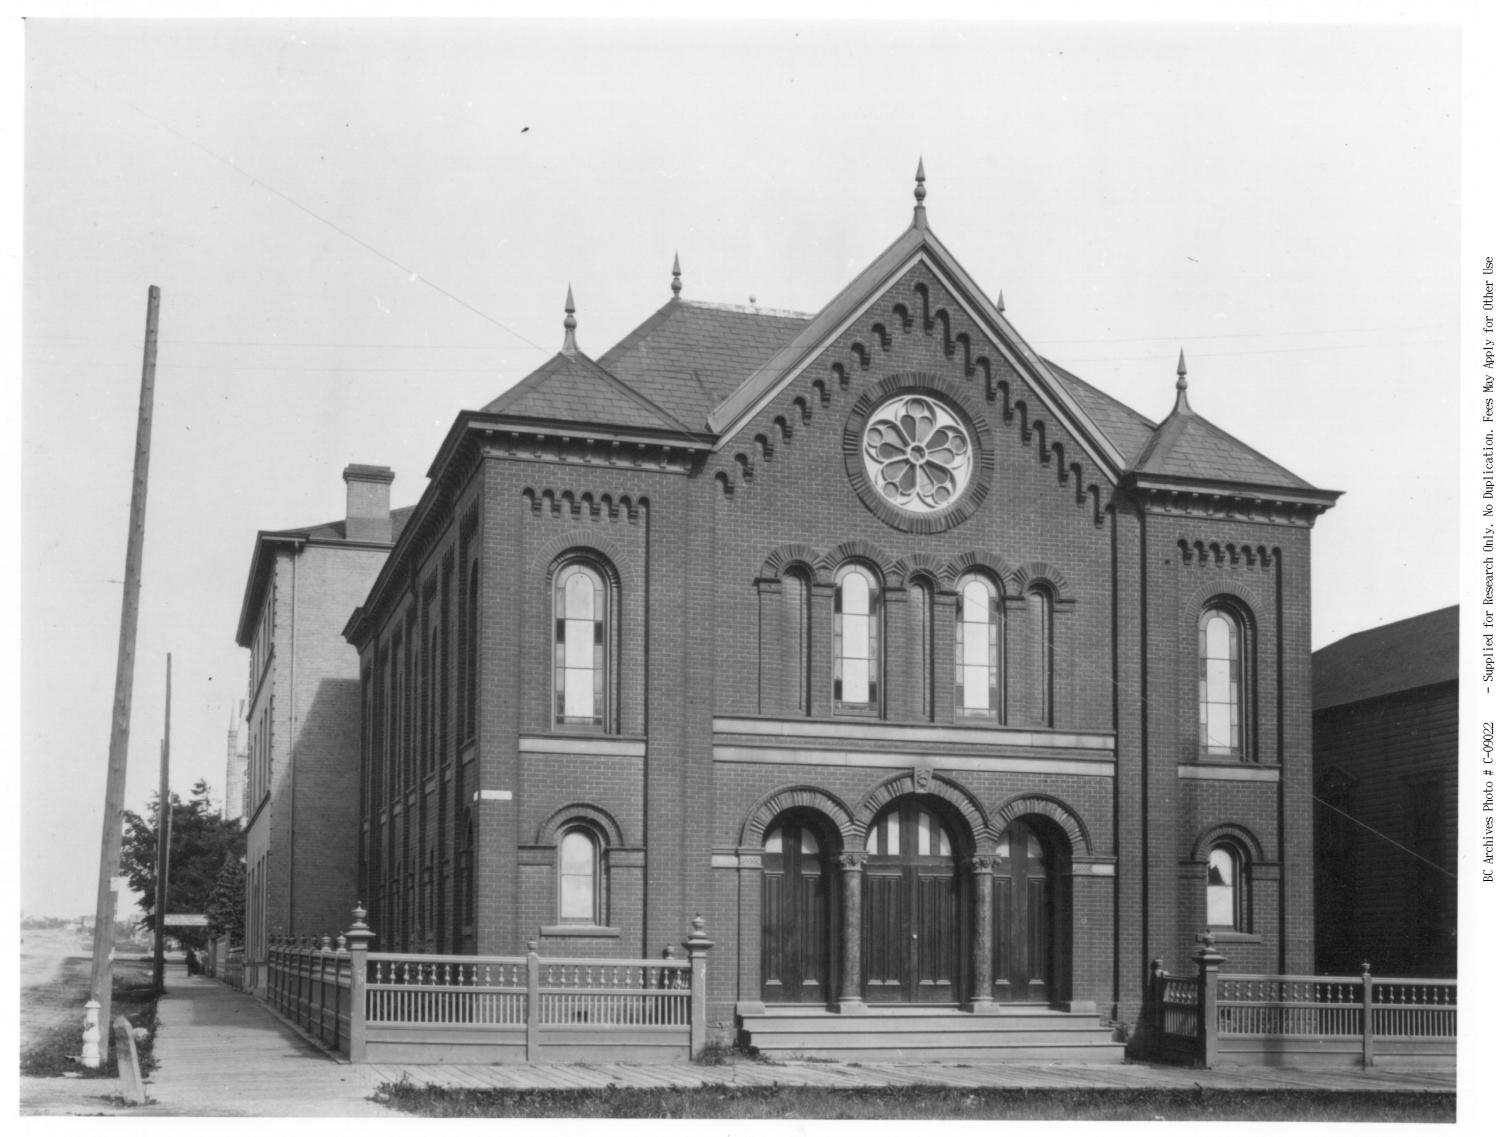 Temple Emmanu-El, the first synagogue in Western Canada, at the southeast corner of Pandora and Blanshard Streets.